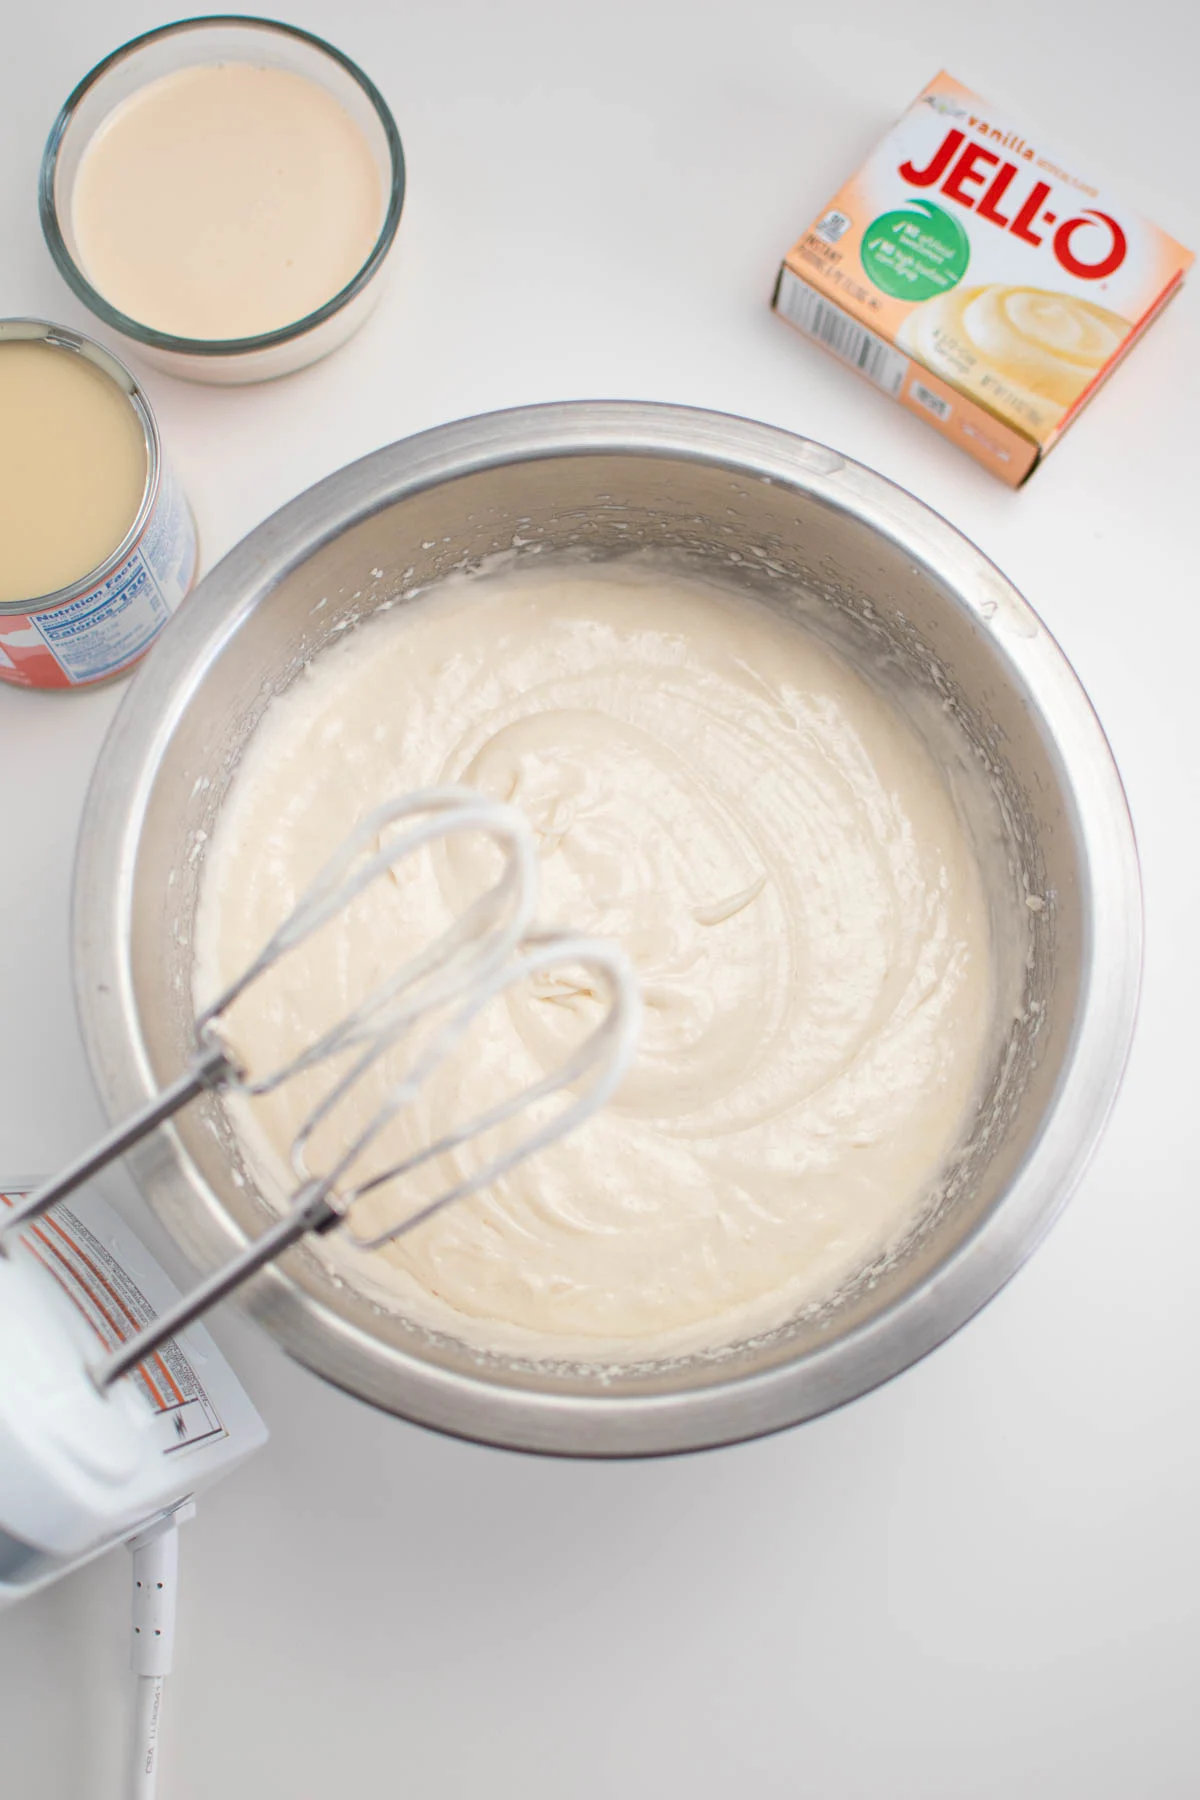 White cake batter in metal mixing bowl with beaters above.